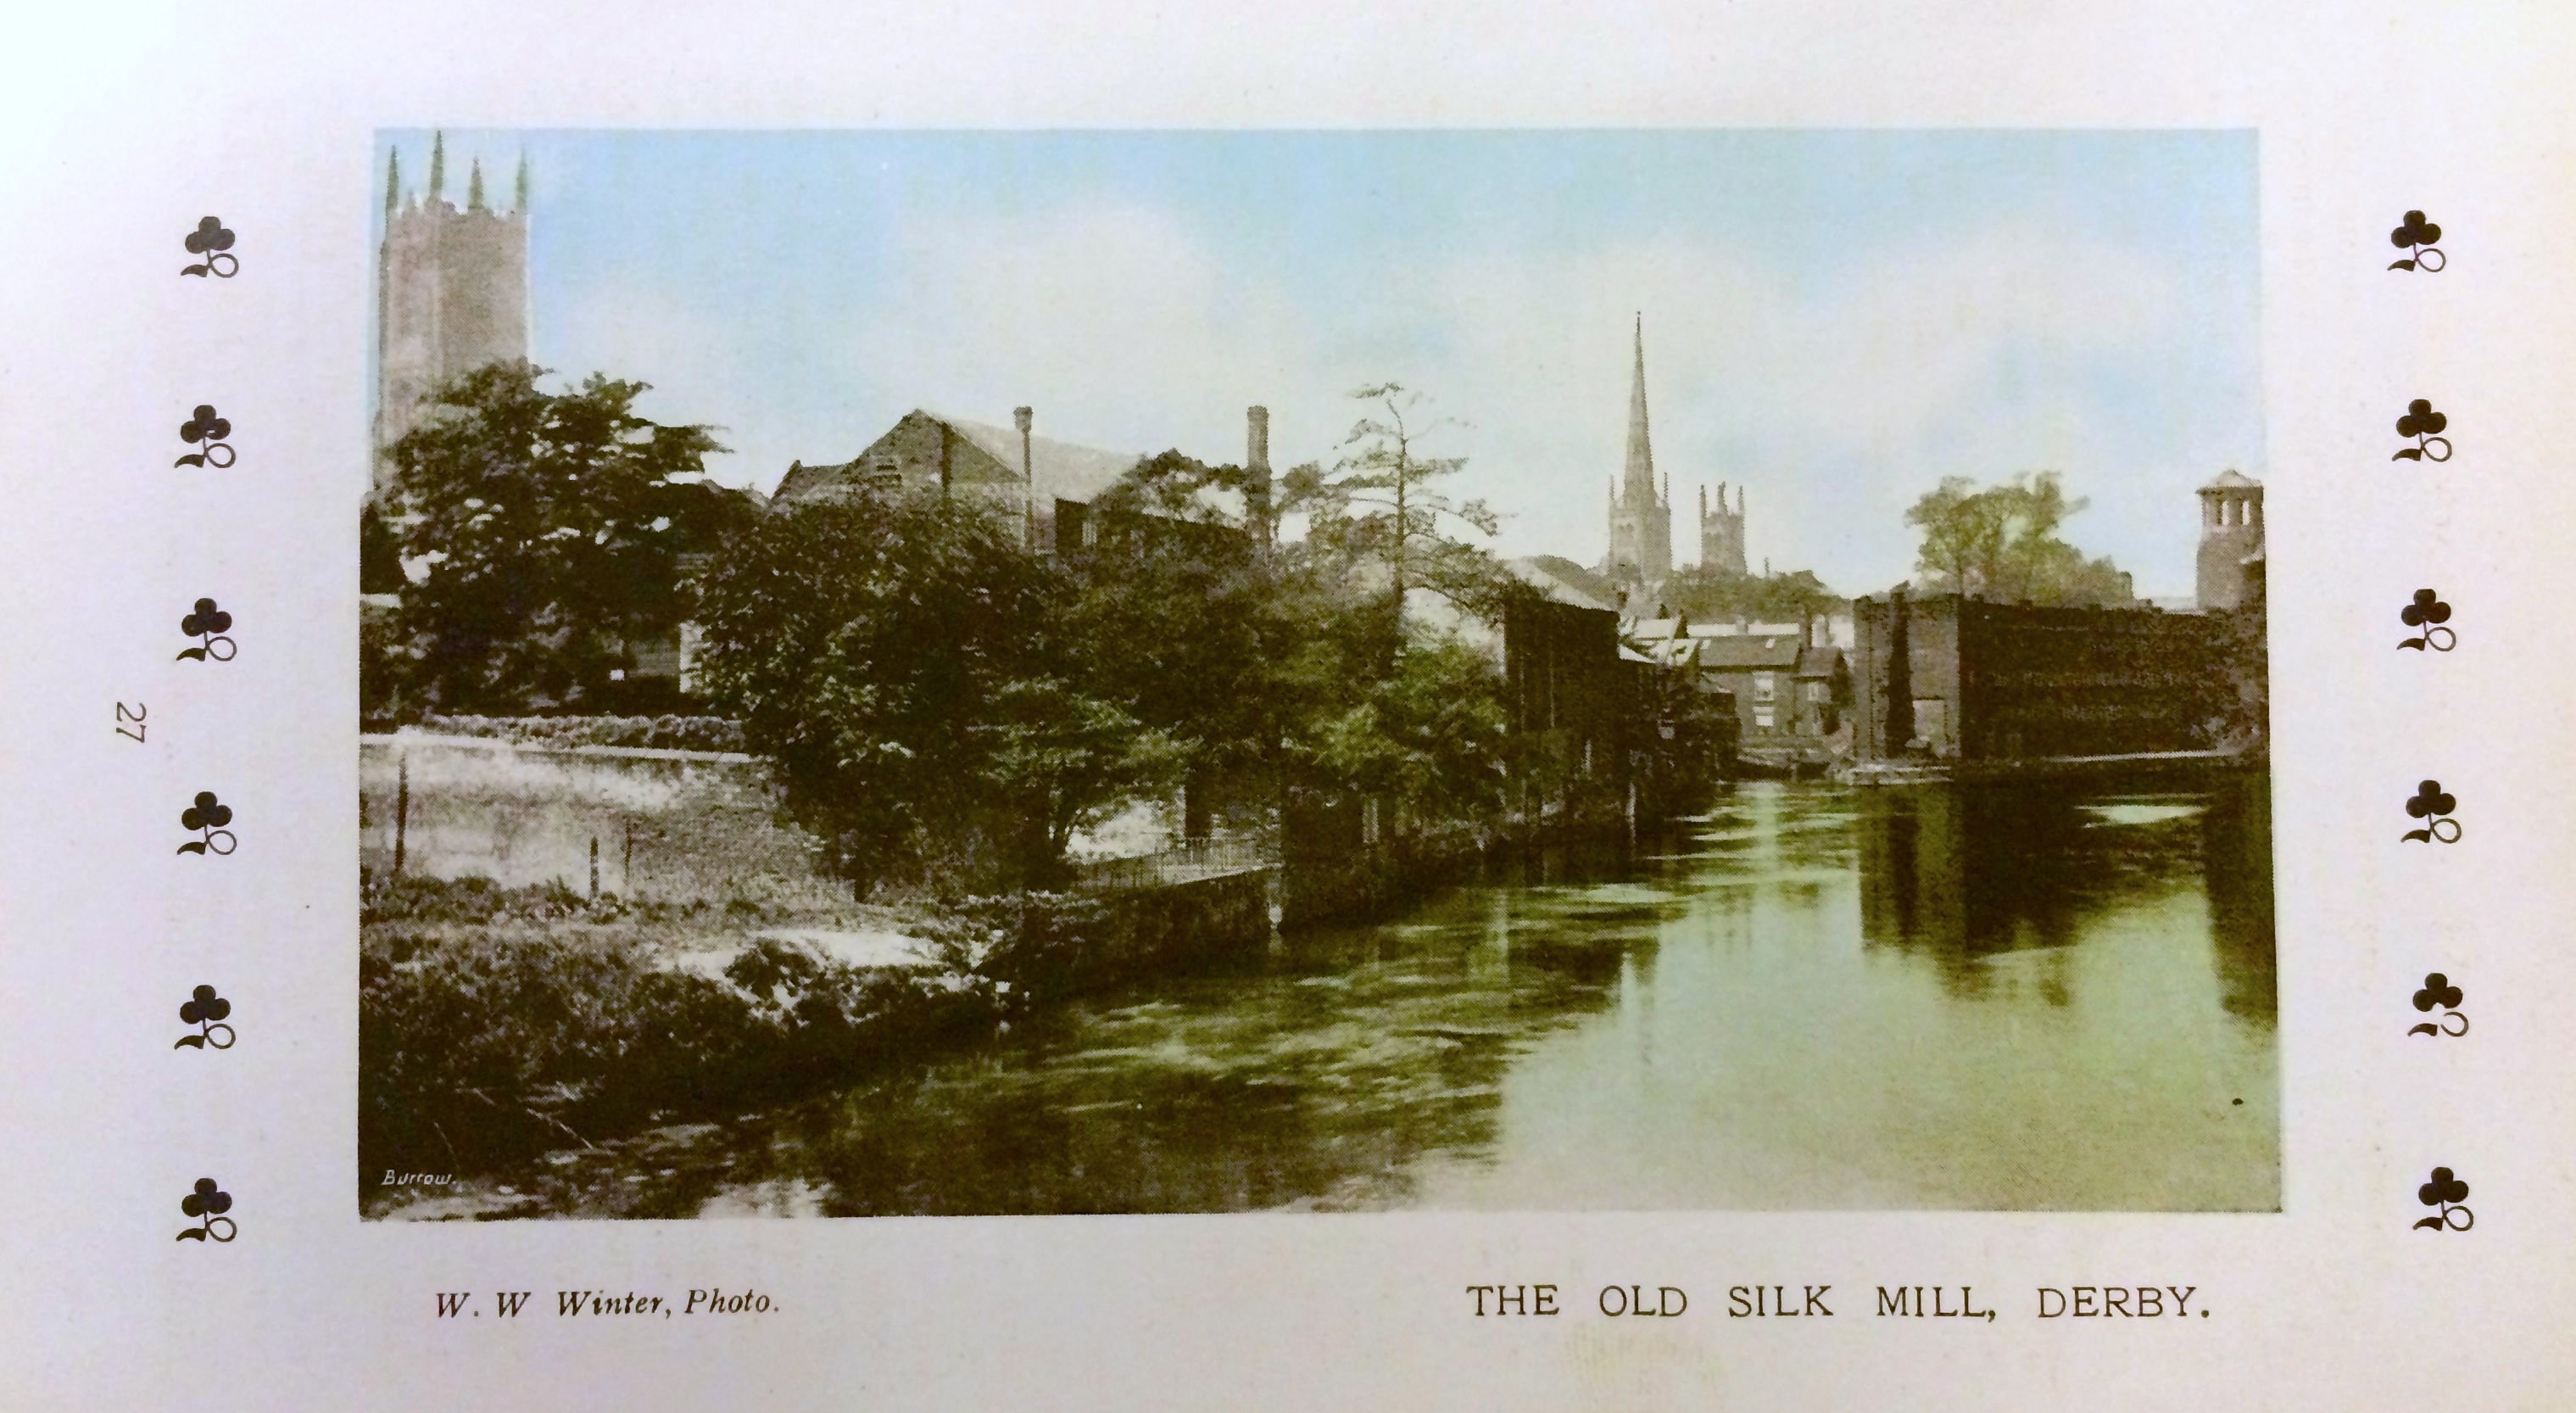 An antique print view of the River Derwent in Derby with the Silk Mill in the distance, viewed from the Exeter Bridge.